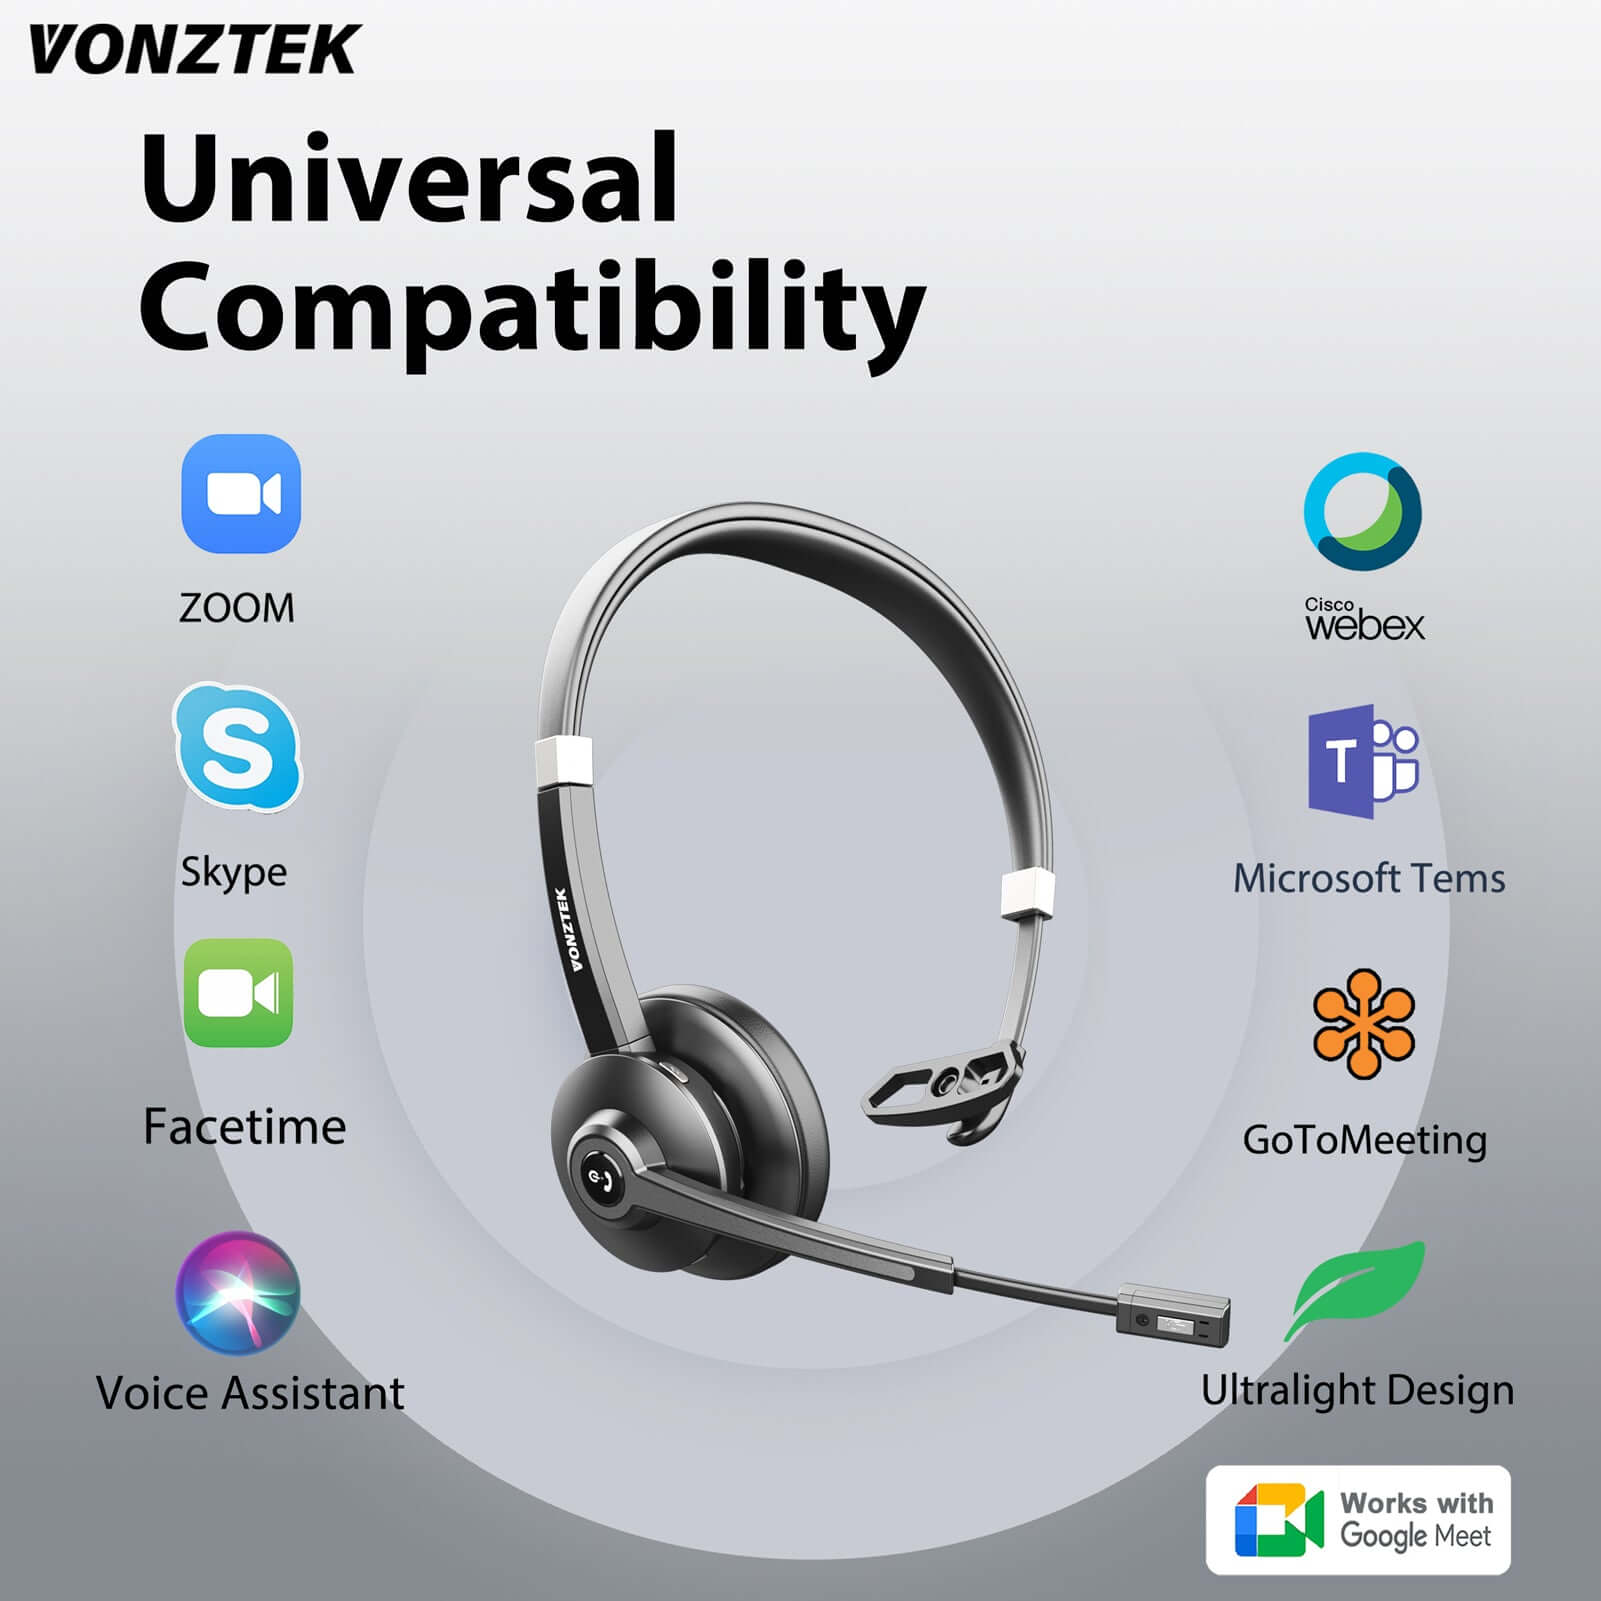 Universal compatibility,Zoom,Skype,Facetime,Voice Assistant,Webex,Microsoft Tems,GoTo Meeting,Ultralight Design,Works with Google Meet.